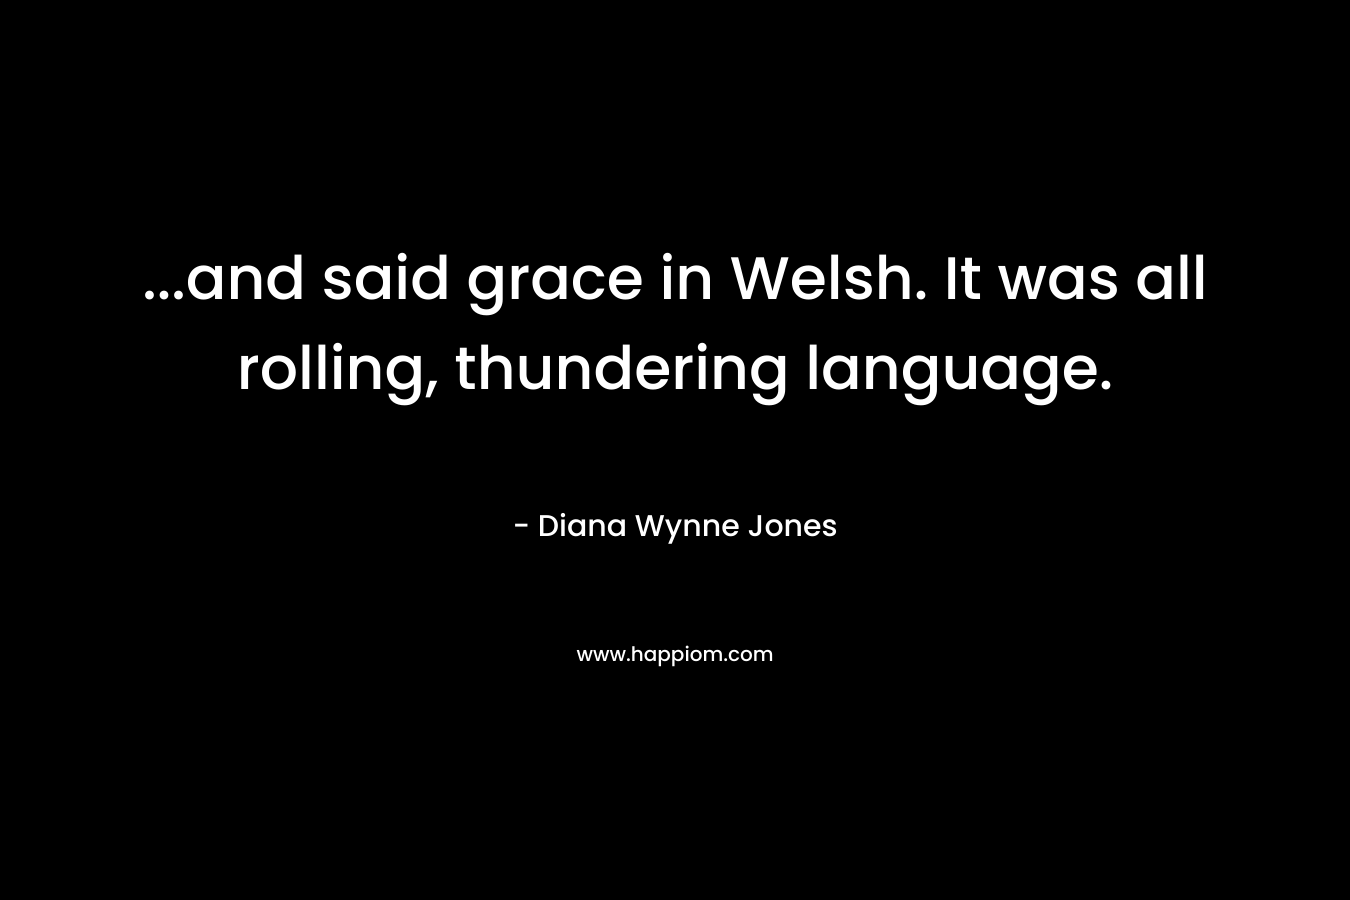 ...and said grace in Welsh. It was all rolling, thundering language.